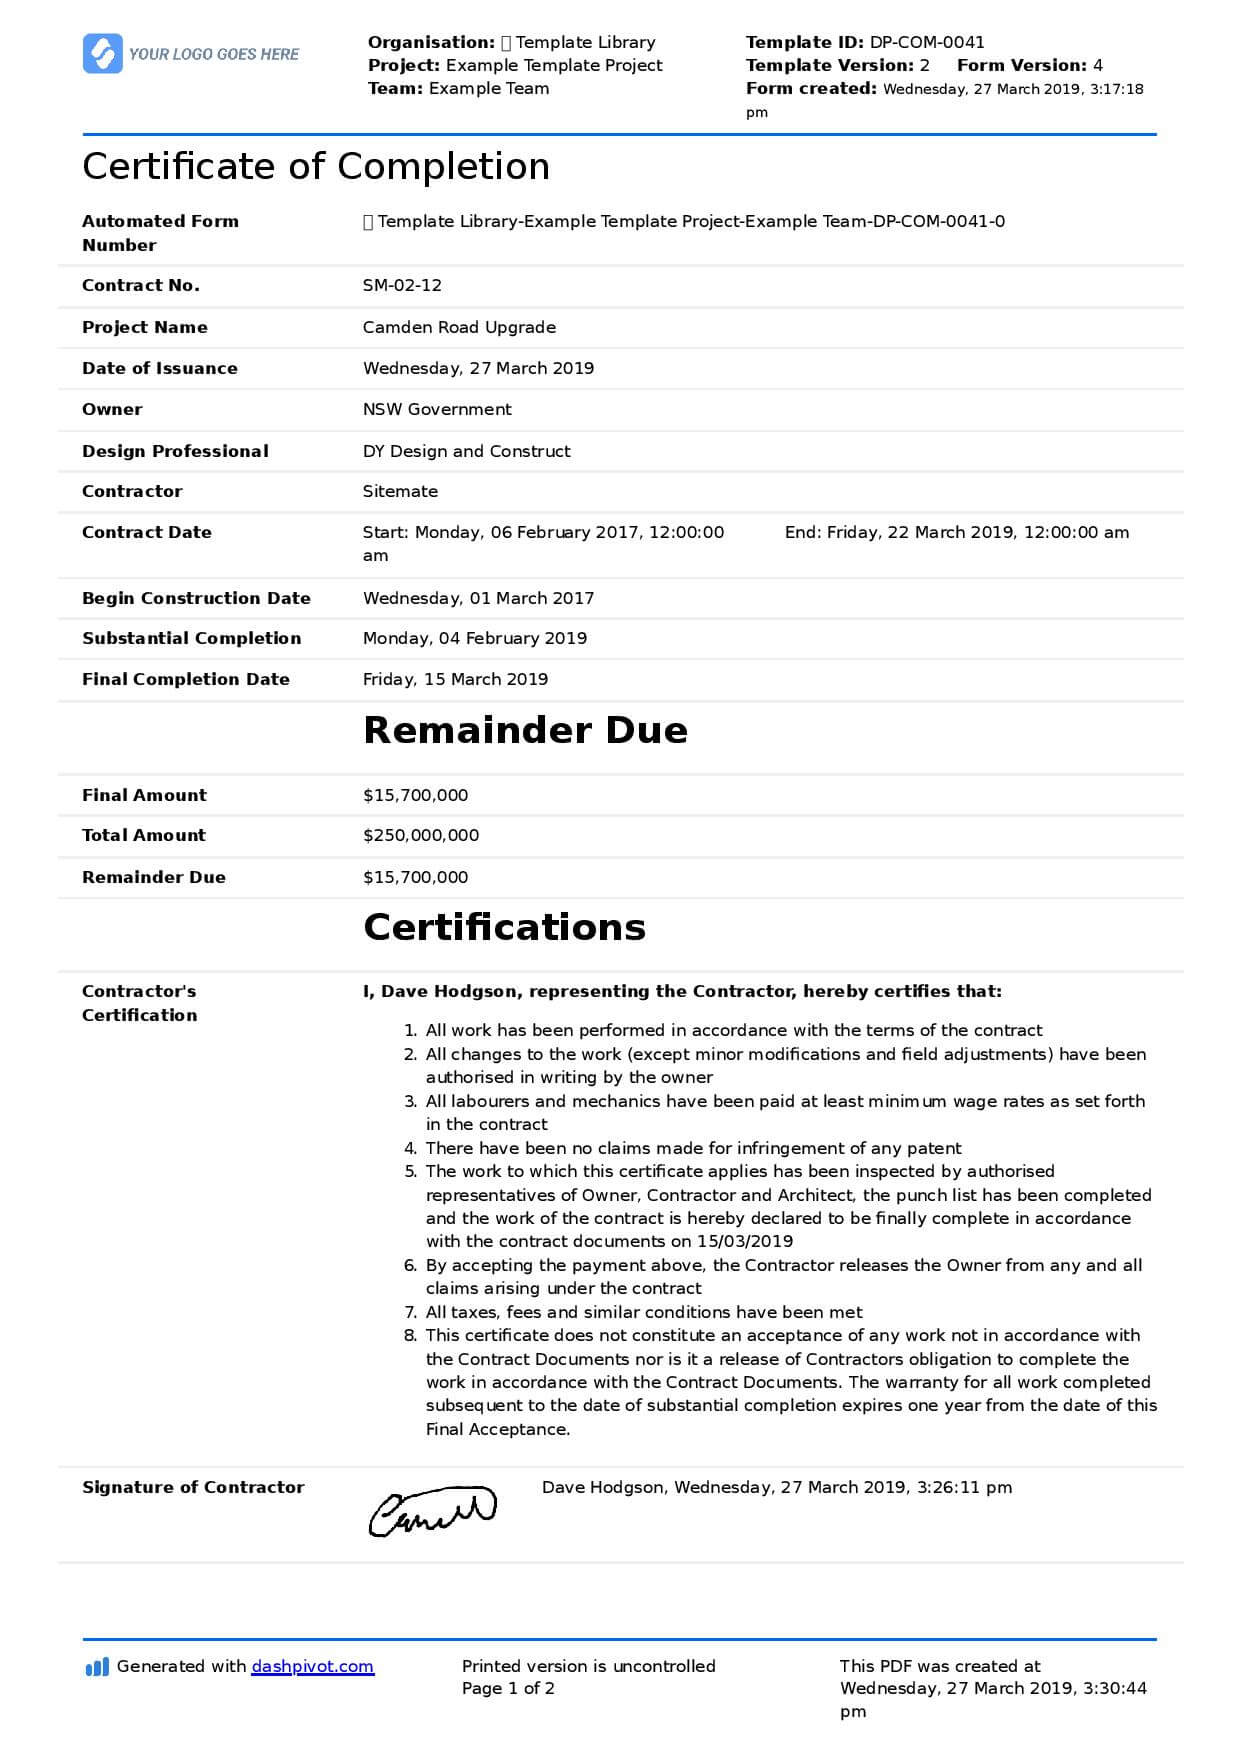 Certificate Of Completion For Construction (Free Template + Regarding Certificate Of Completion Template Construction